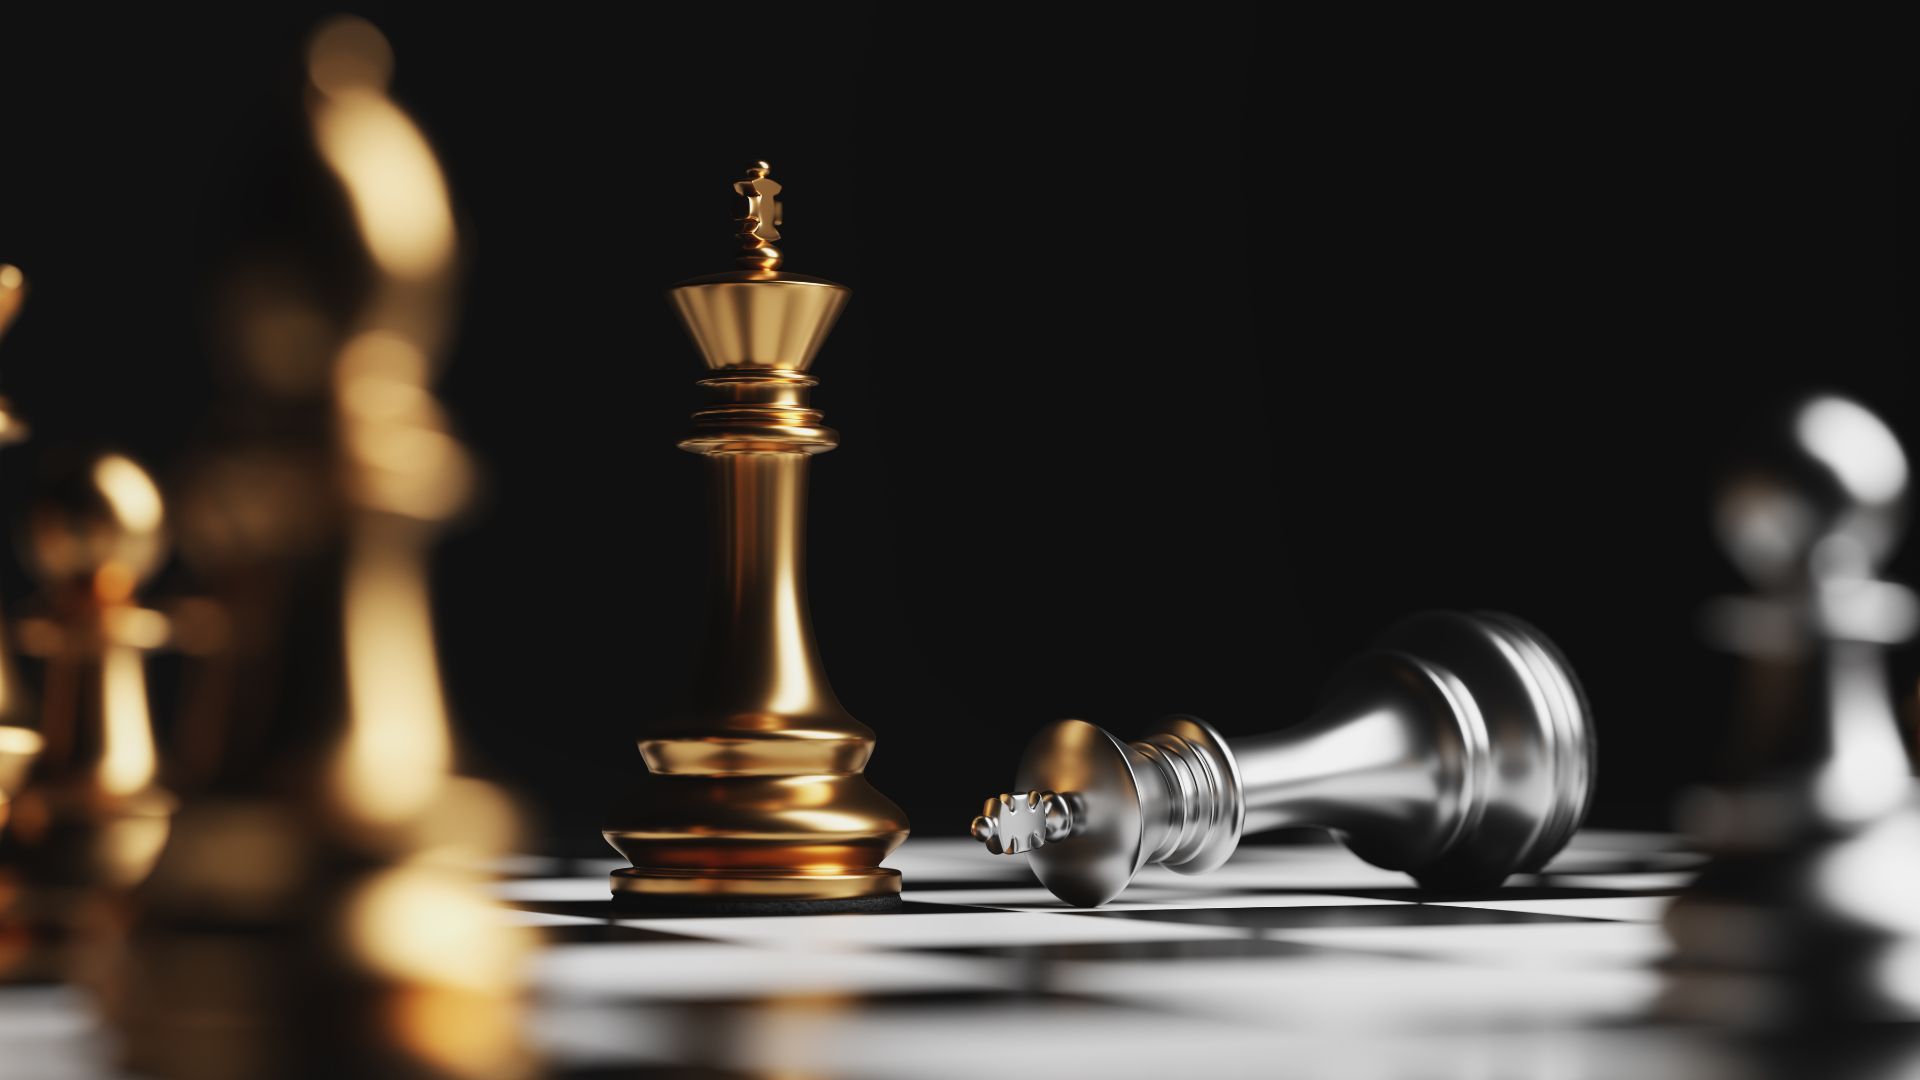 The chess conquered the world - HD wallpaper